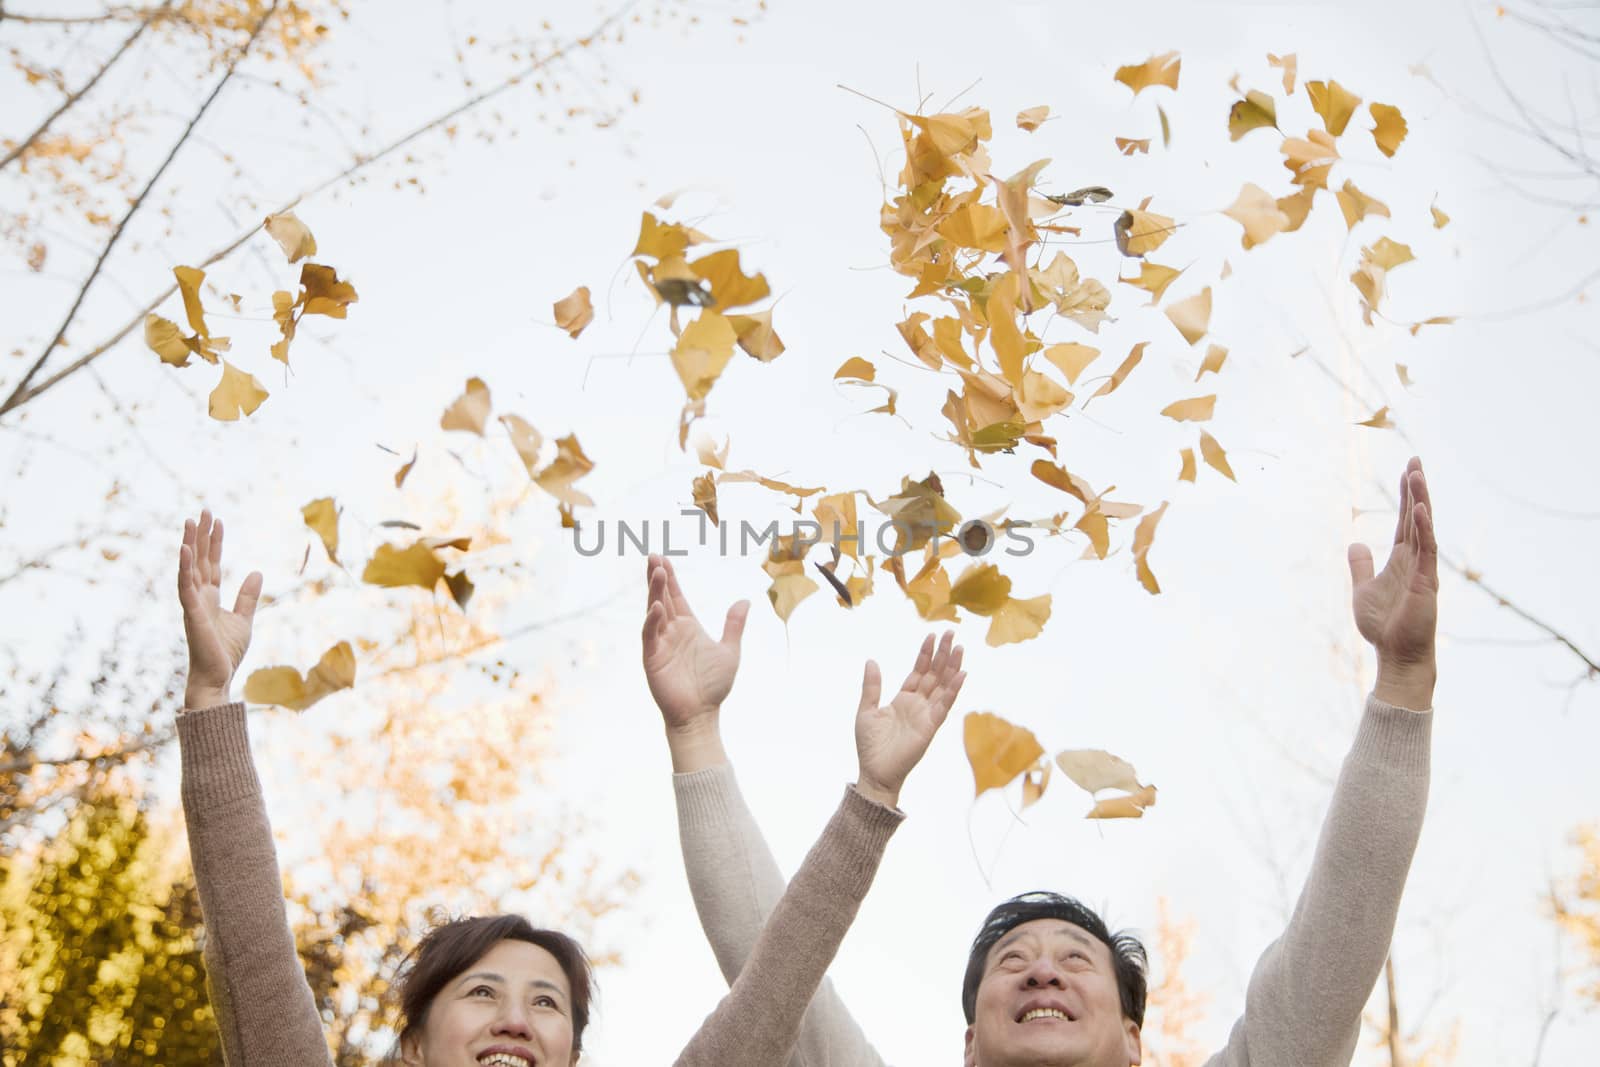 Mature Couple Throwing Leaves into the Air